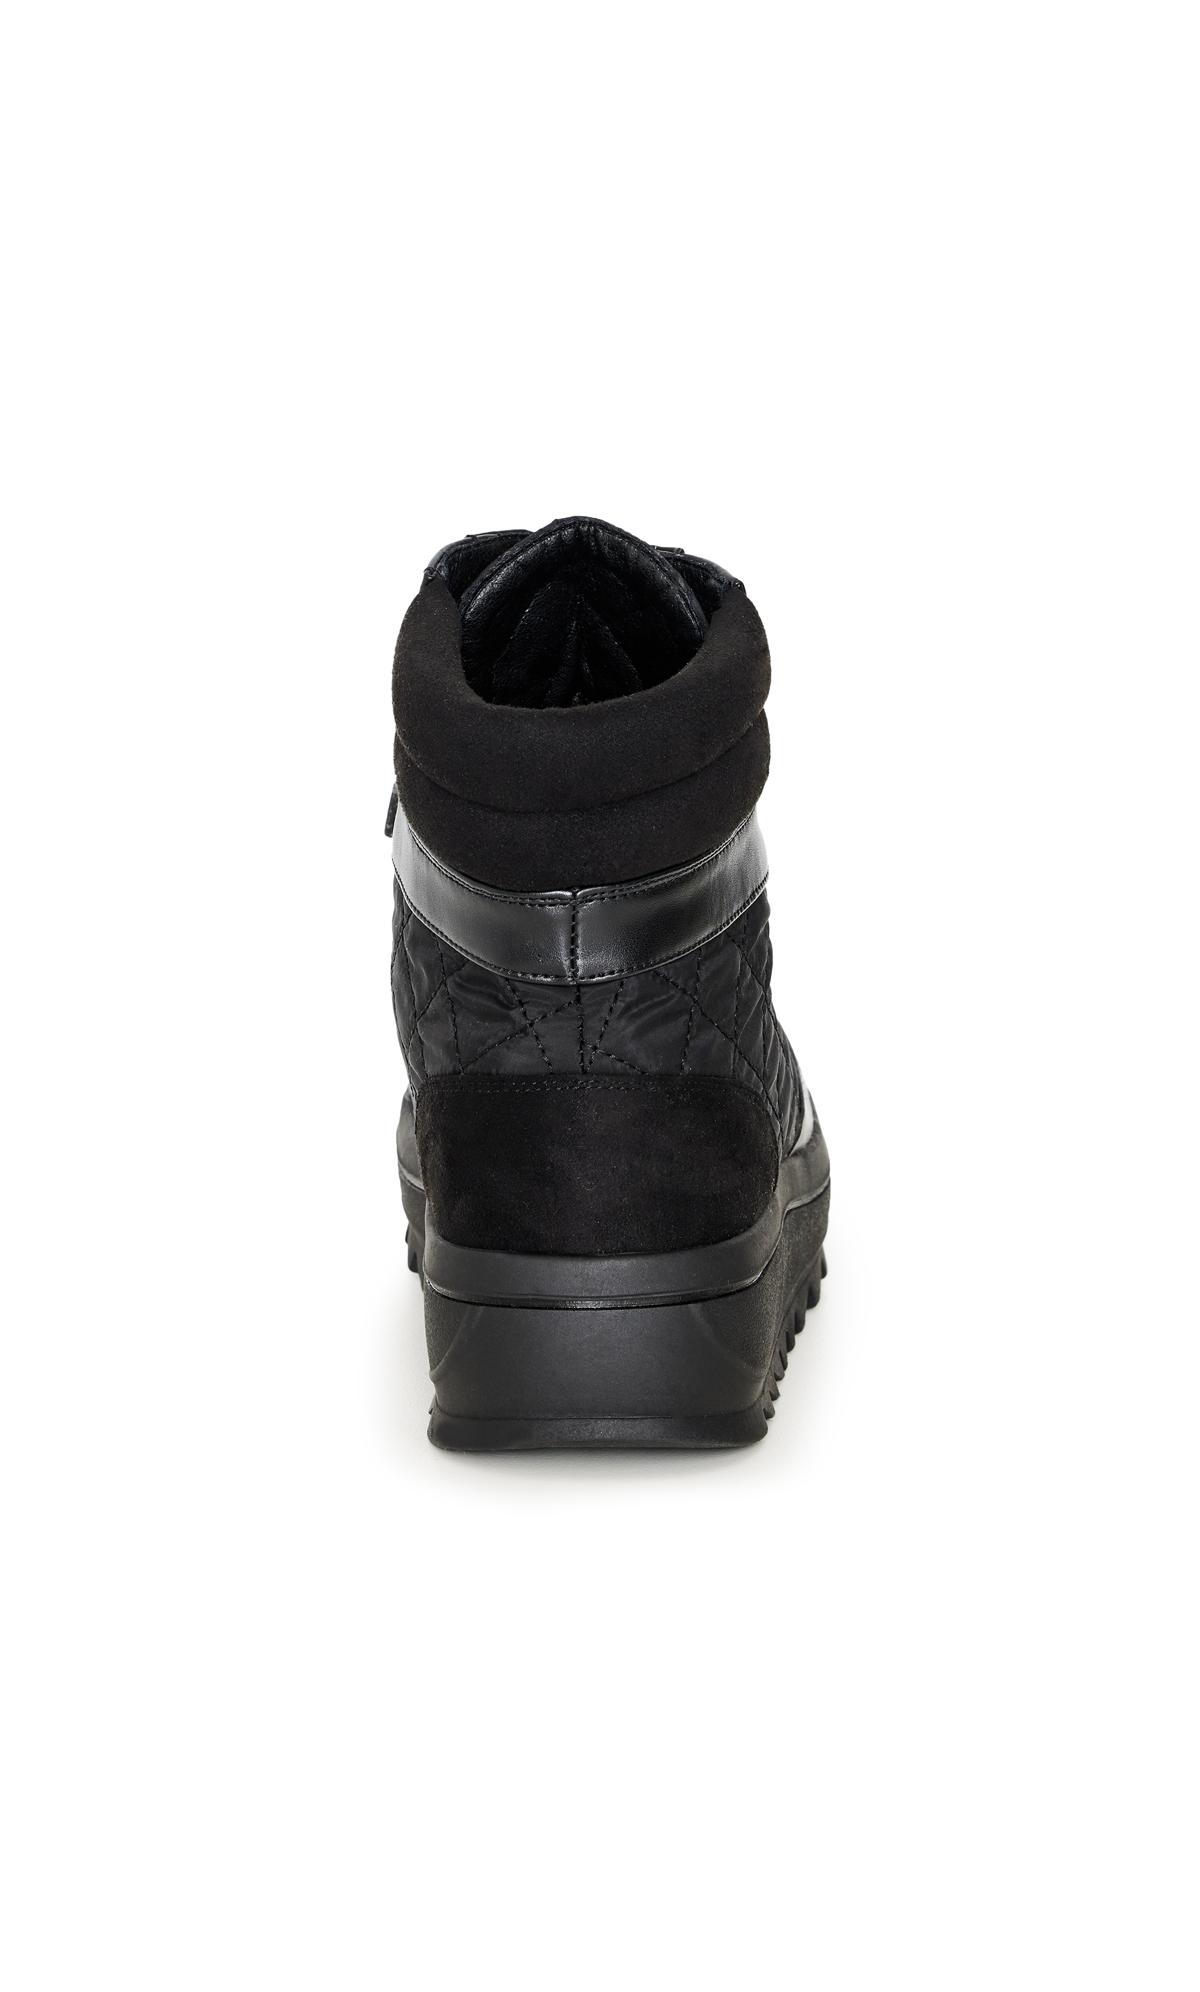 Piper Black Wide Fit Winter Boot 3